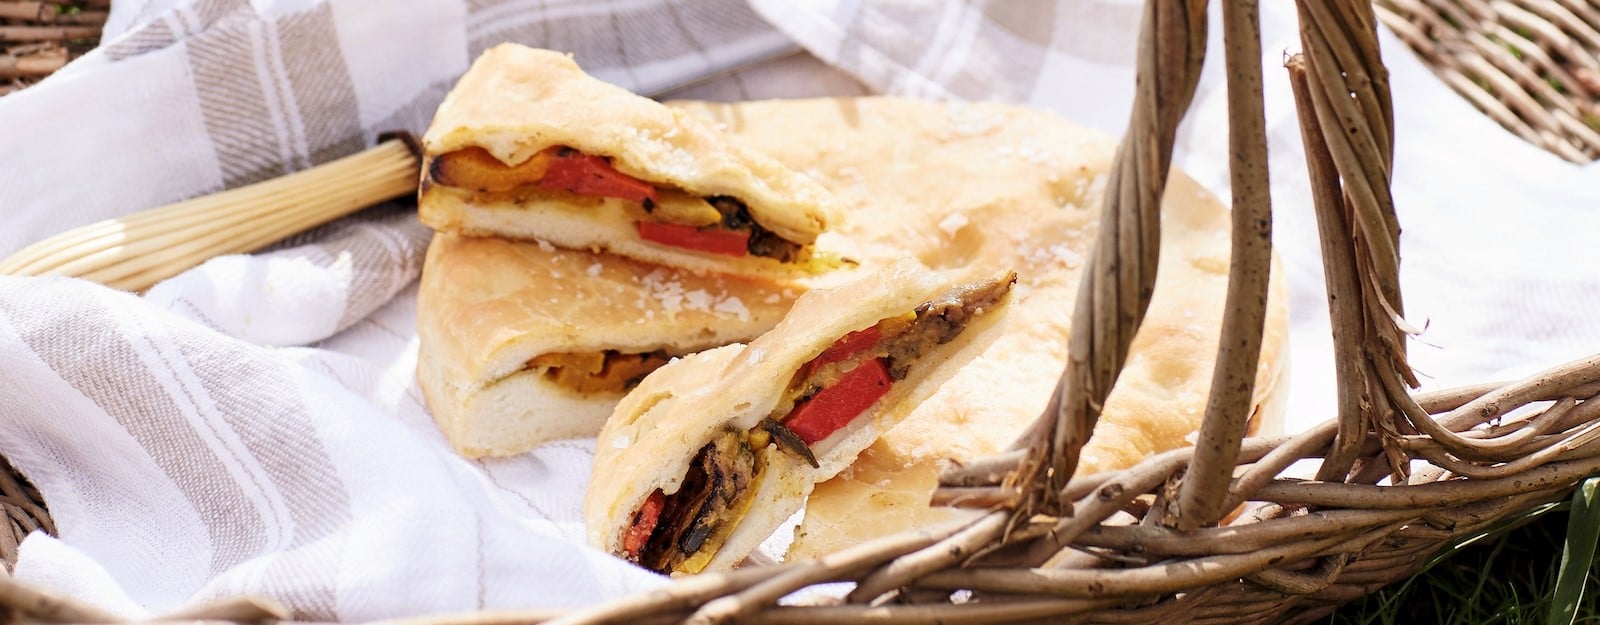 Image of grilled vegetable focaccia in a picnic basket